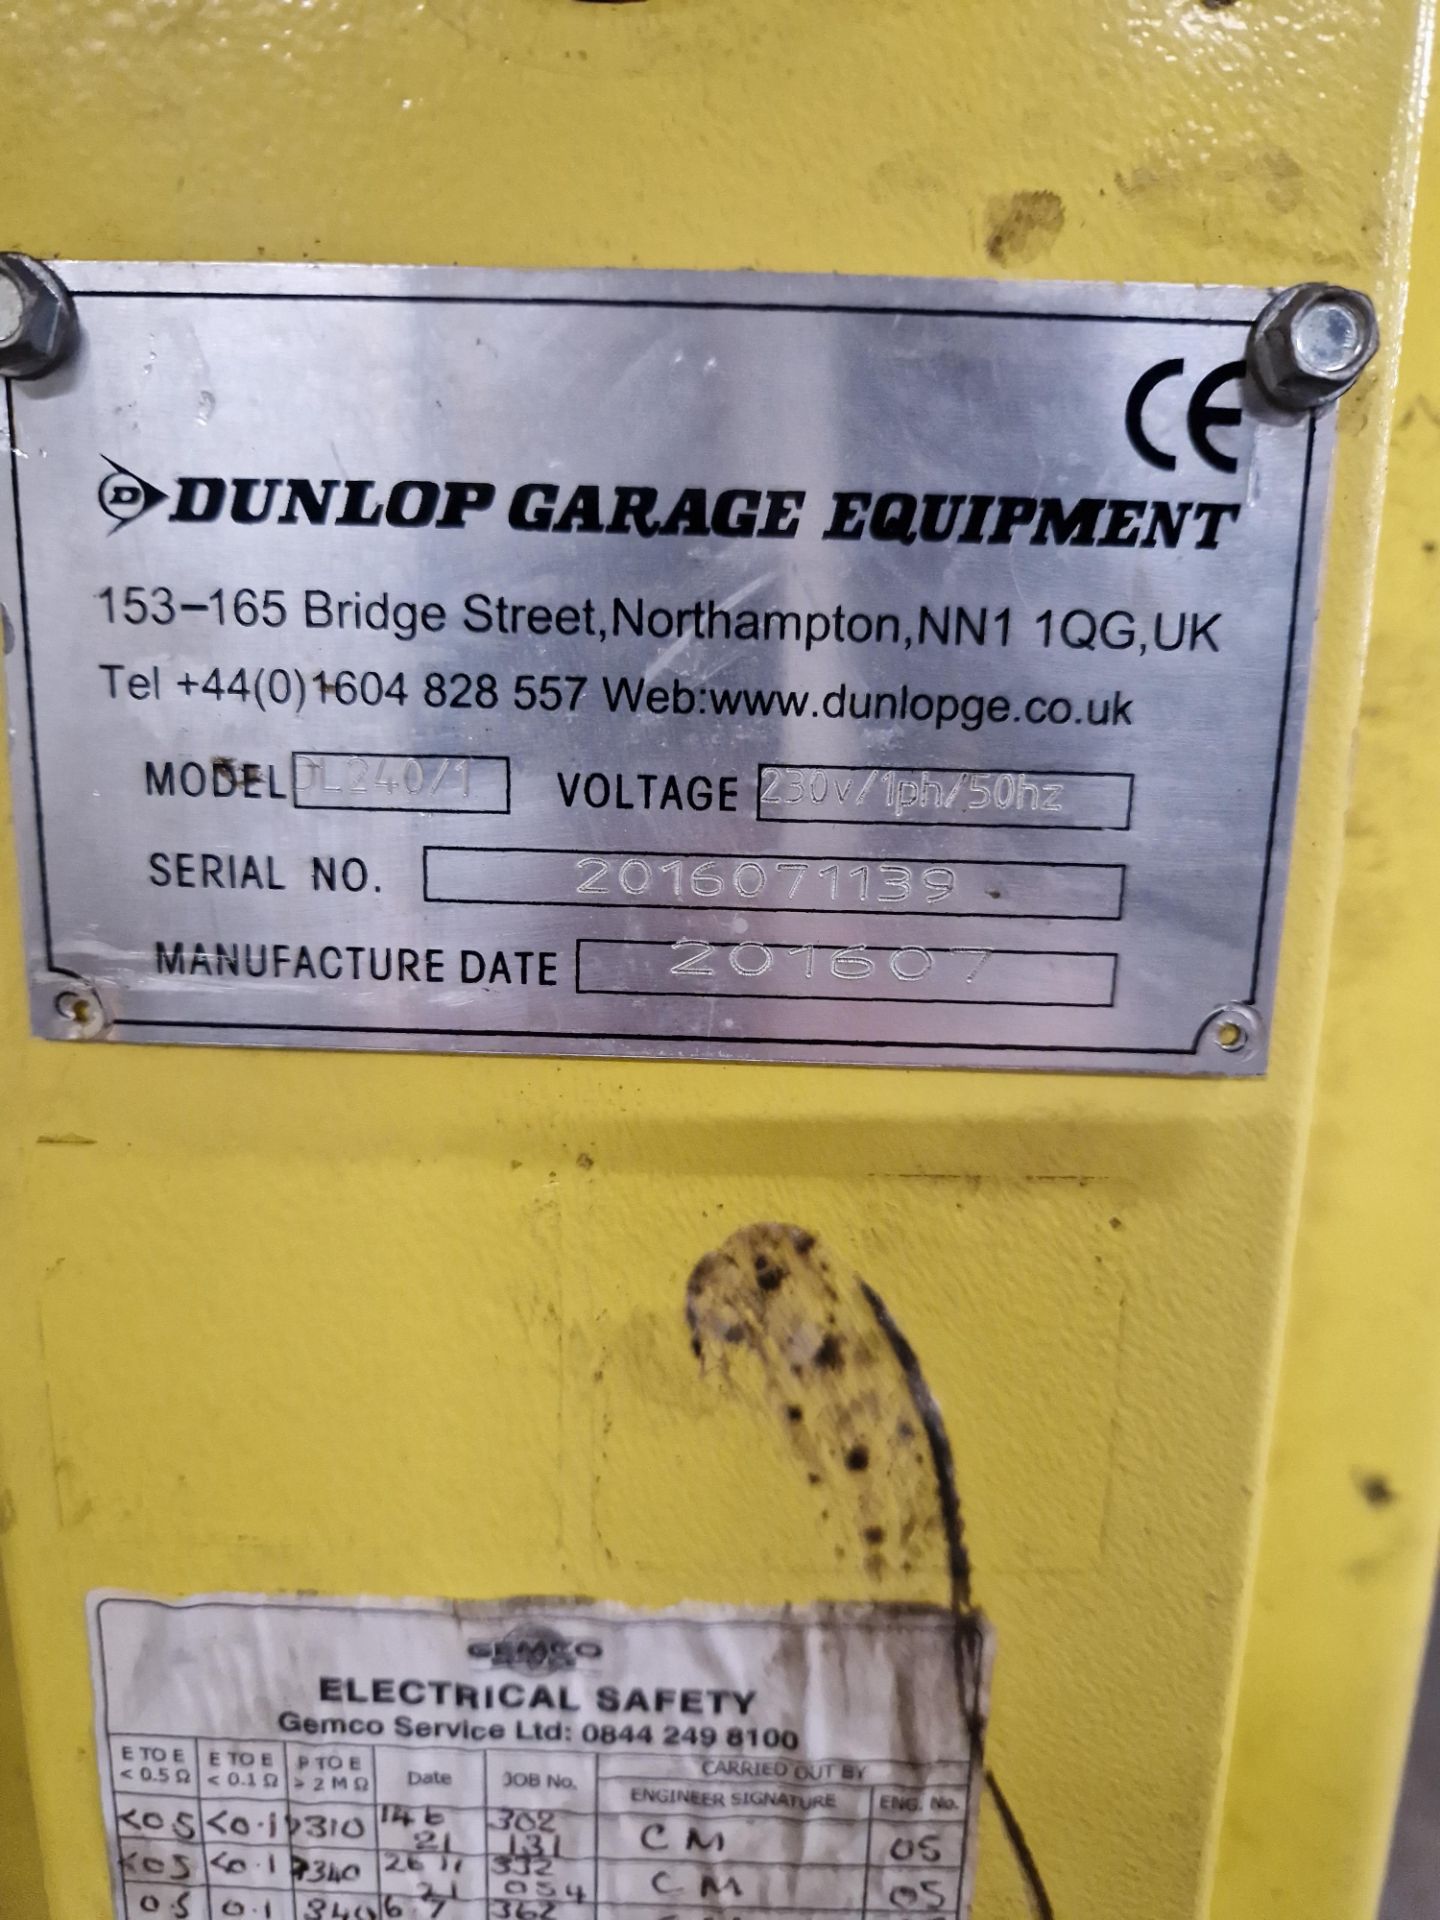 Dunlop Garage Equipment DL240/1 Twin Post Vehicle Lift, 4000KG Capacity, Year of Manufacture 2016, - Image 4 of 4